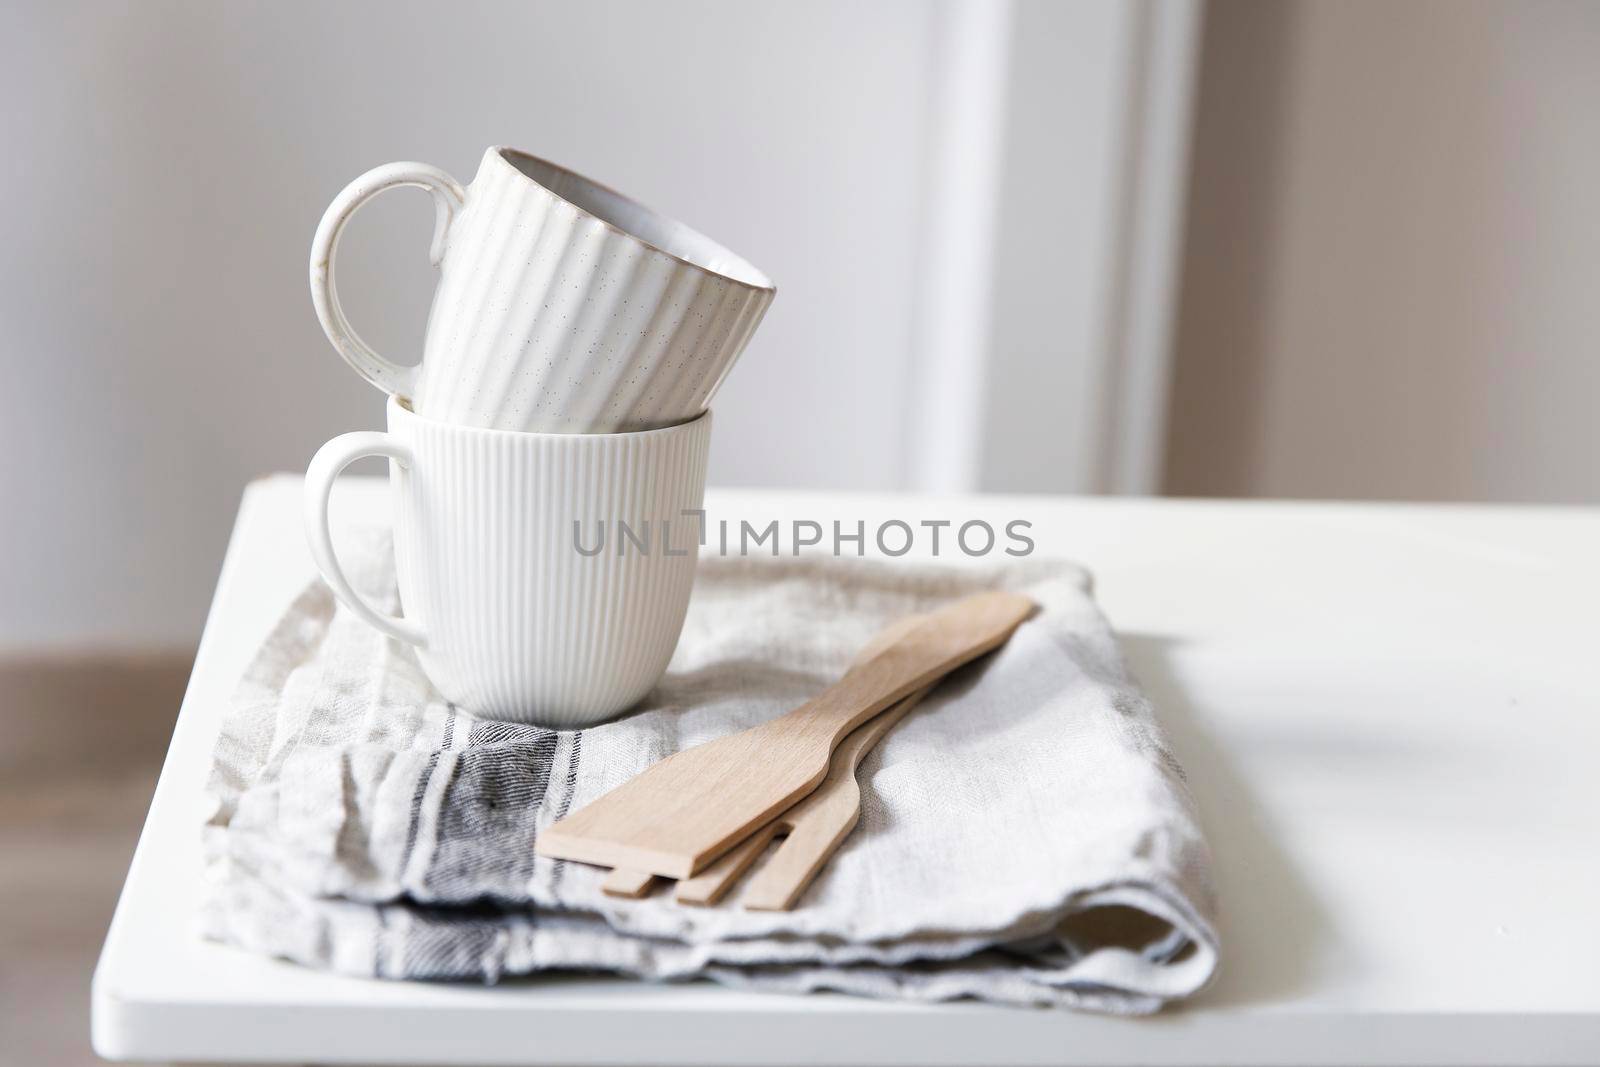 Two white mugs, a kitchen towel, a napkin and wooden frying utensils on the table. Defocus.